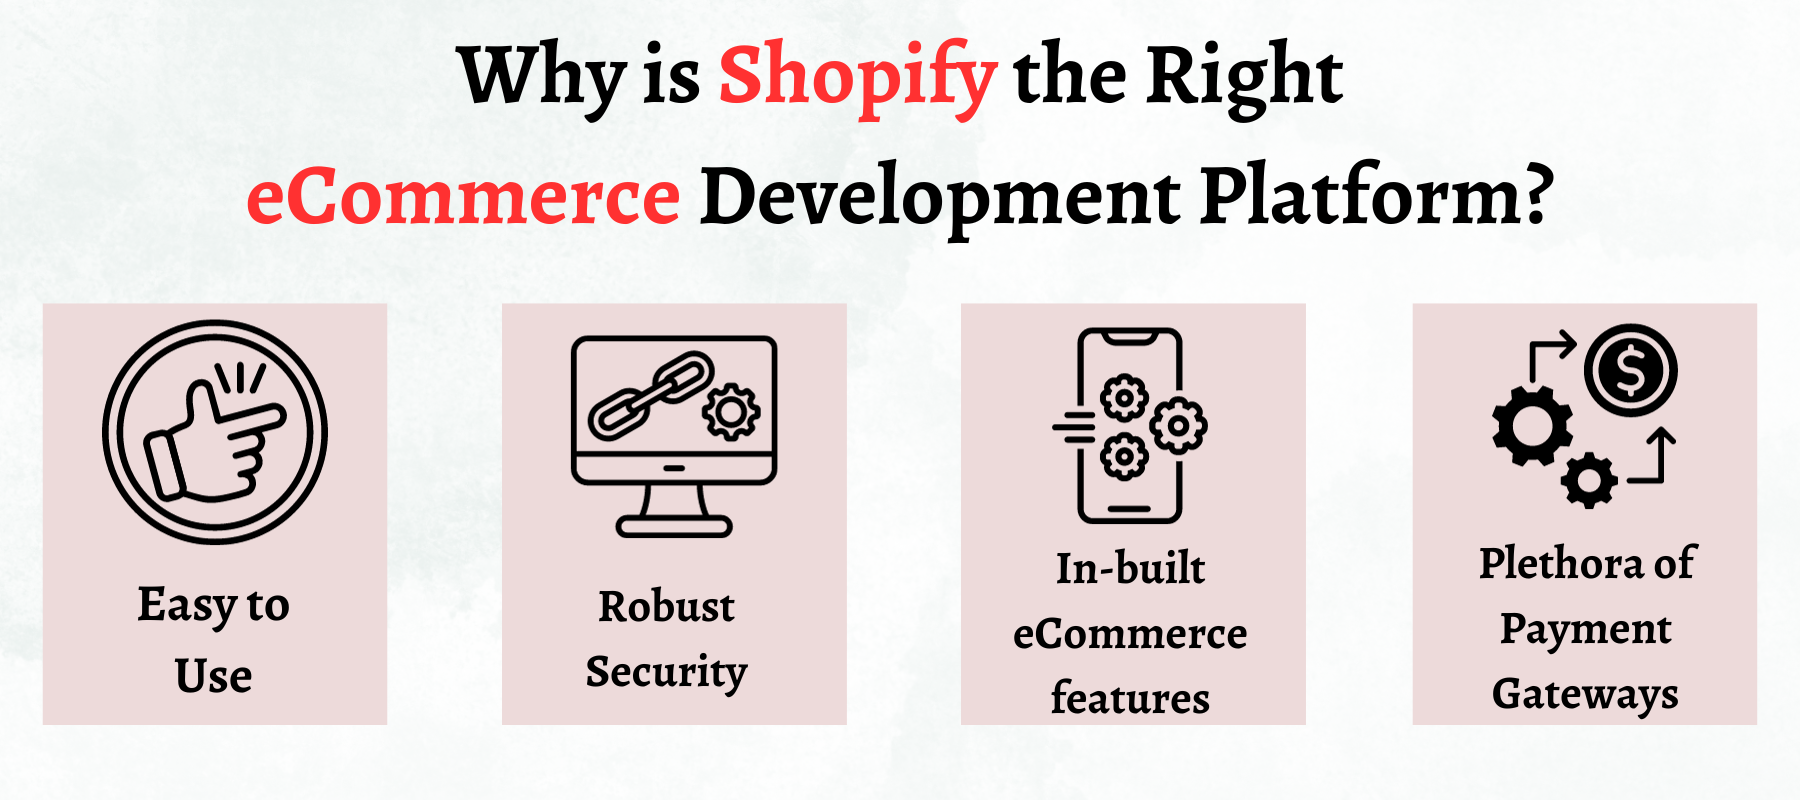 Why is Shopify the Right eCommerce Development Platform?